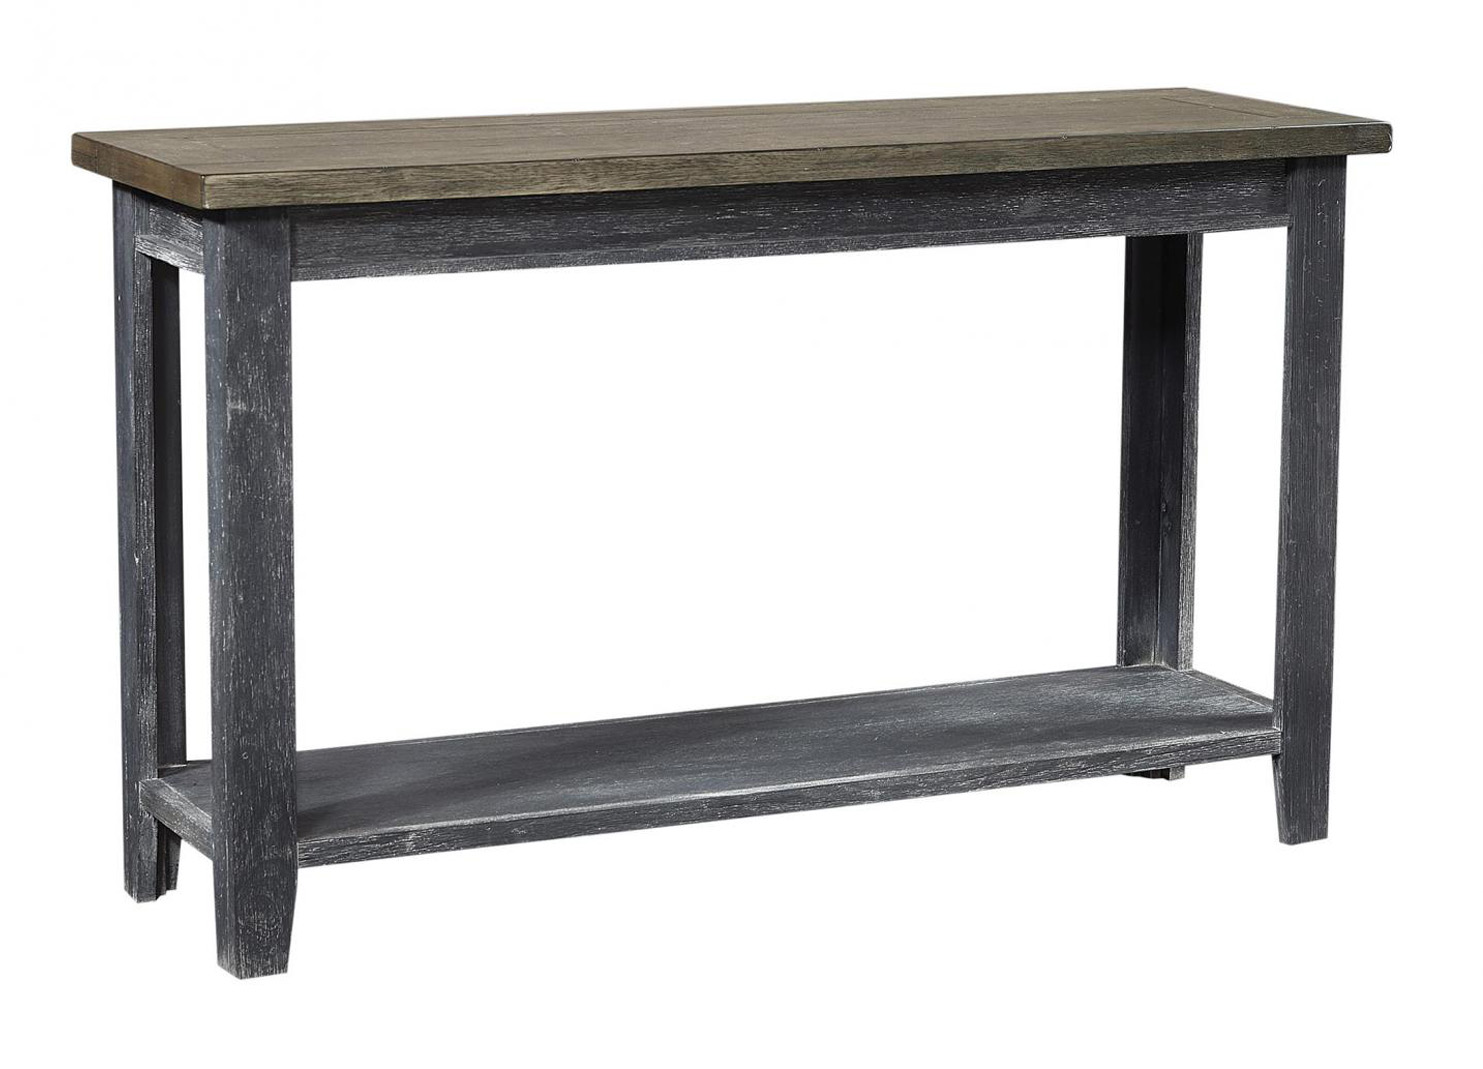 Eastport Sofa Table in the Drifted Black finish